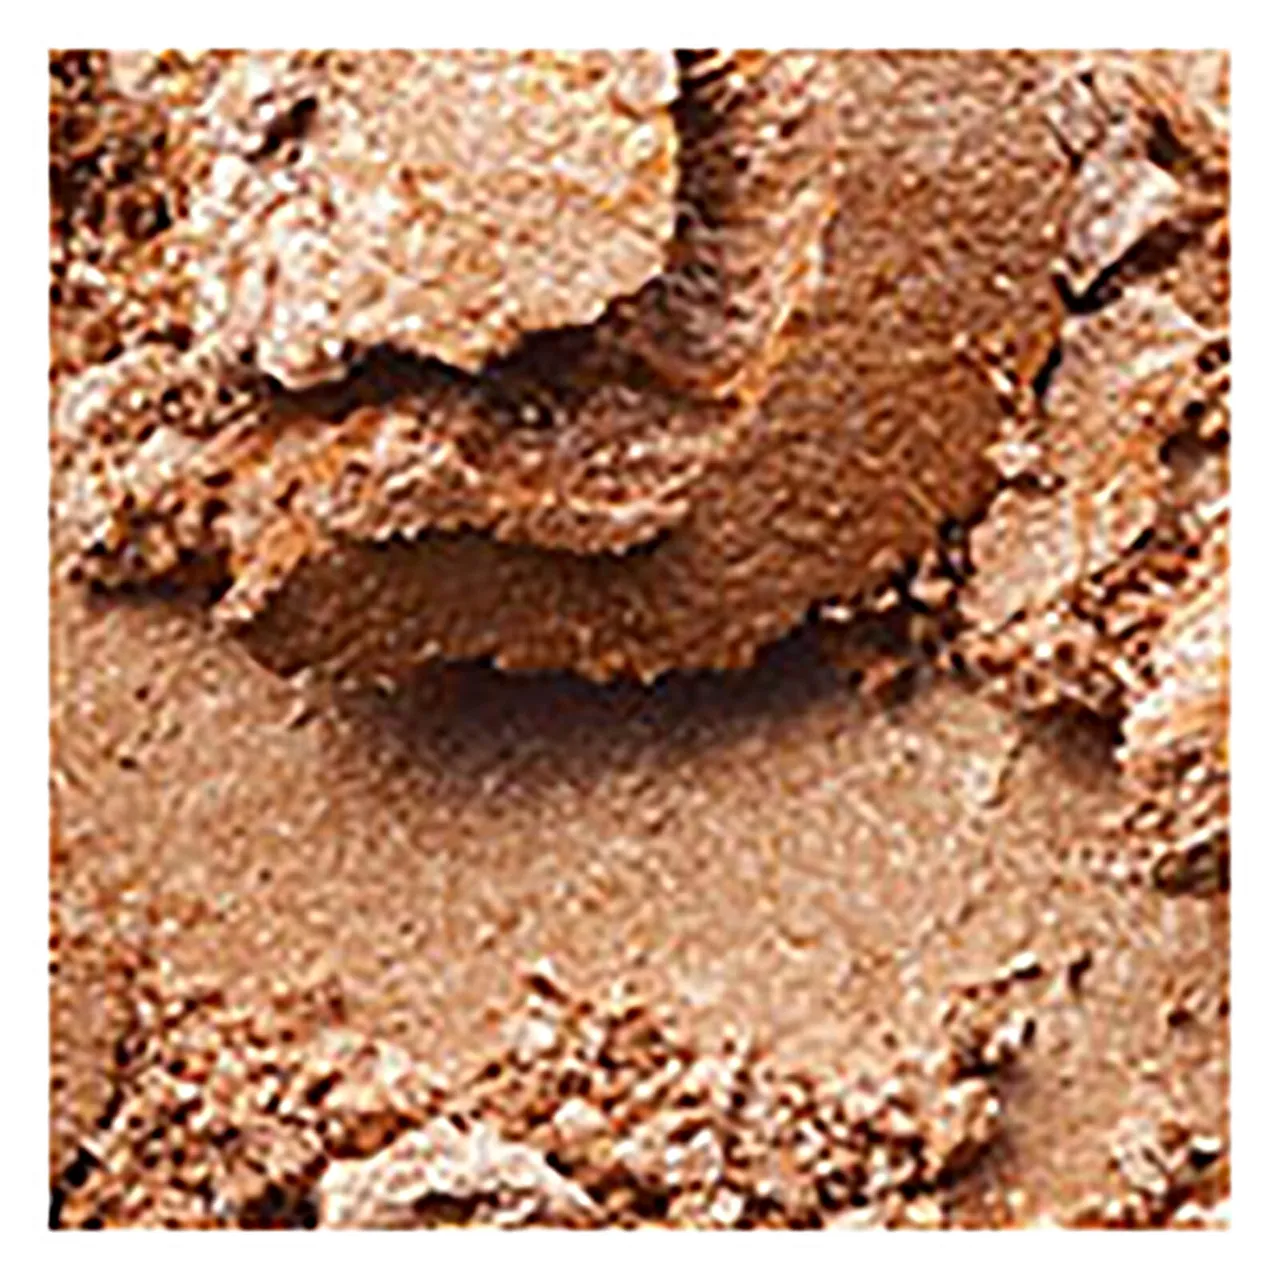 MAC Mineralize Skinfinish Highlighter (Various Shades) - Global Glow